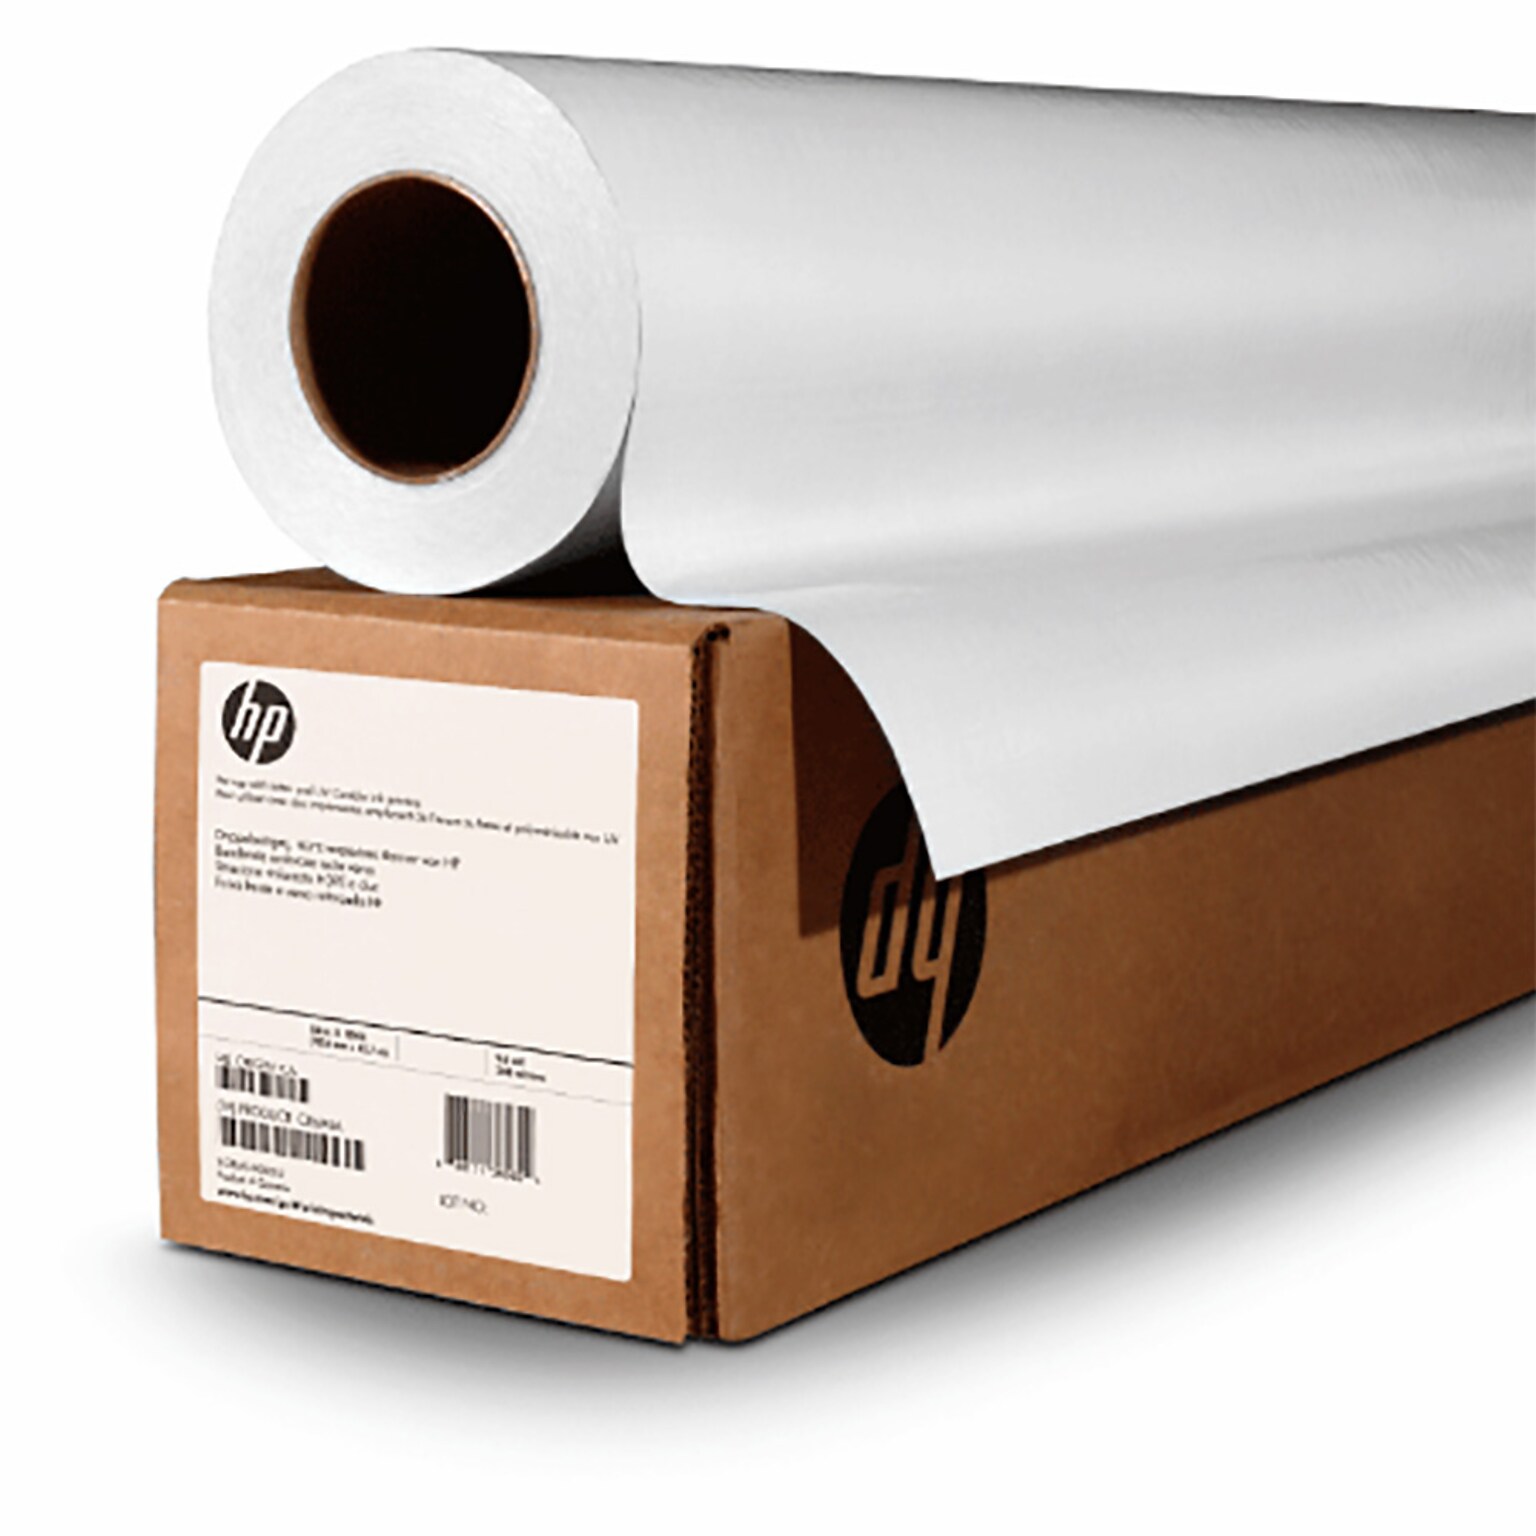 HP Universal Wide Format Permanent Adhesive Paper, 36 x 150, Gloss Finish (J3H62A)